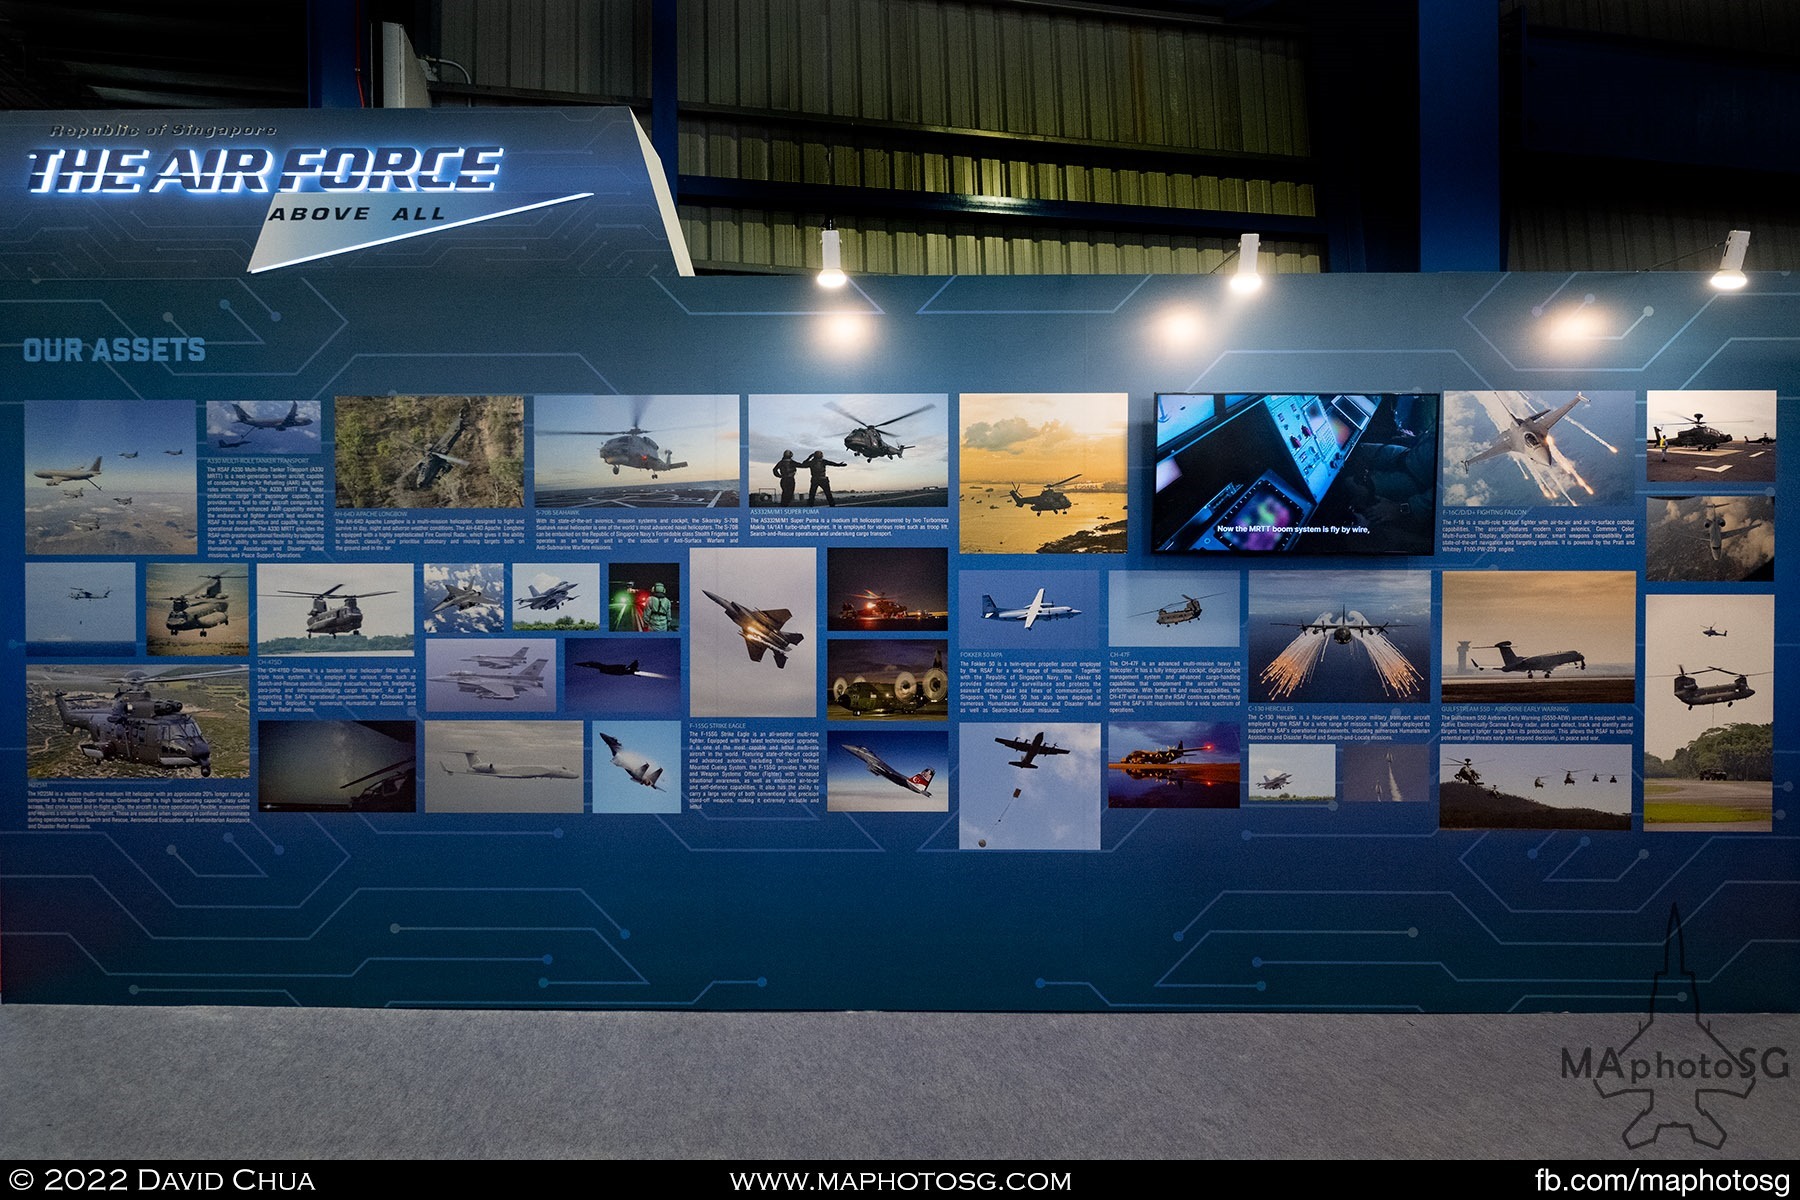 One of the few RSAF Feature walls in exhibition hall depicting the assets of the RSAF